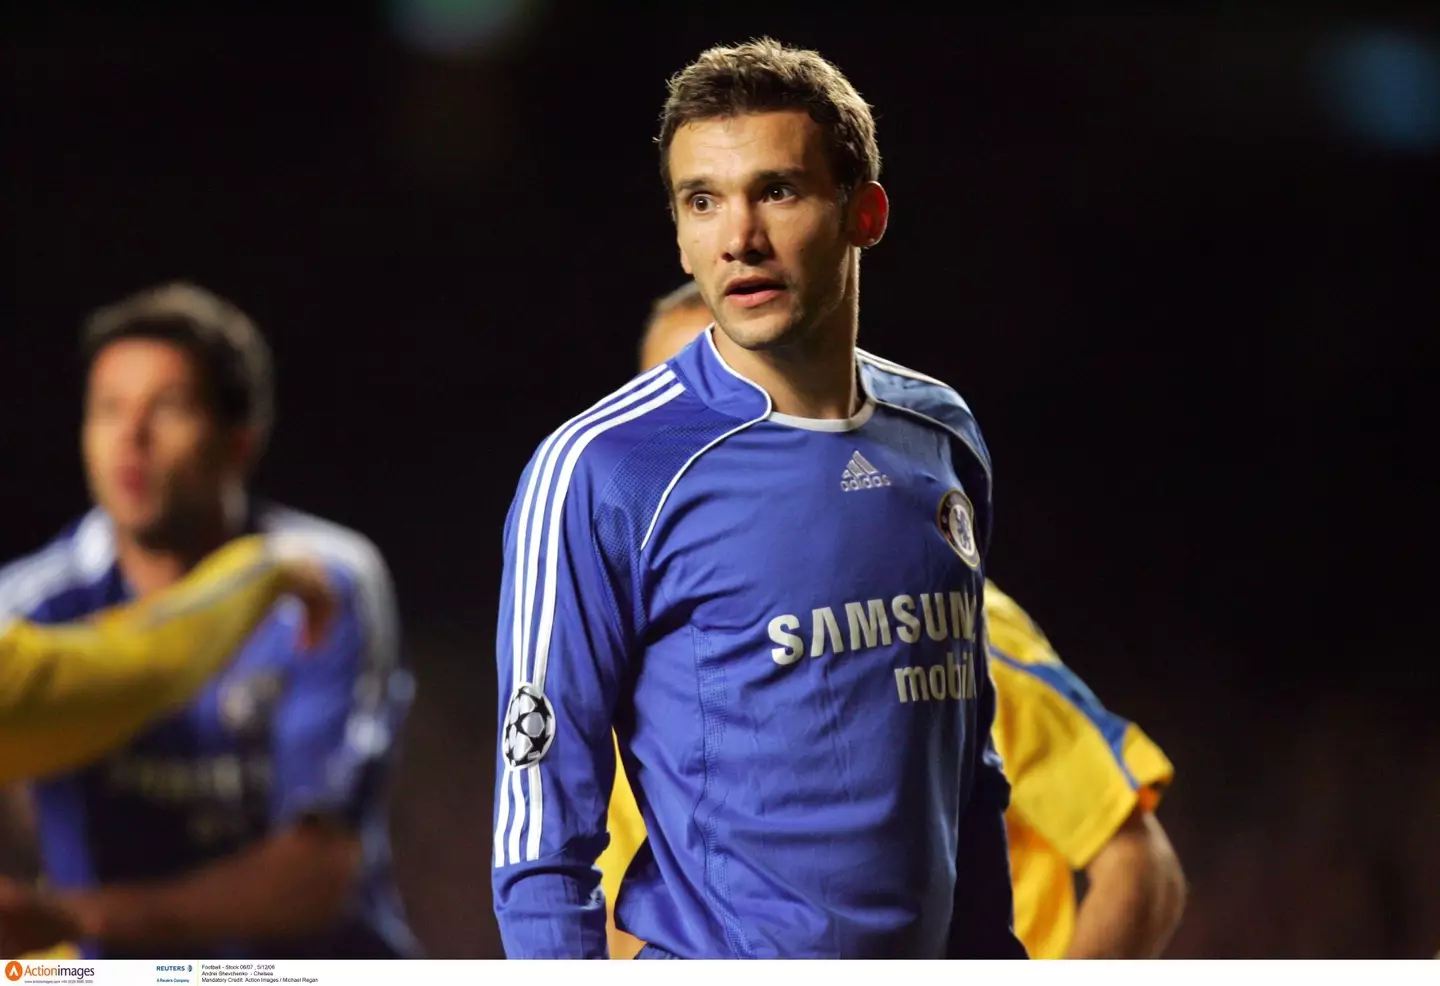 Shevchenko is part of a pair of Chelsea striker flops next to each other on the list. Image: PA Images